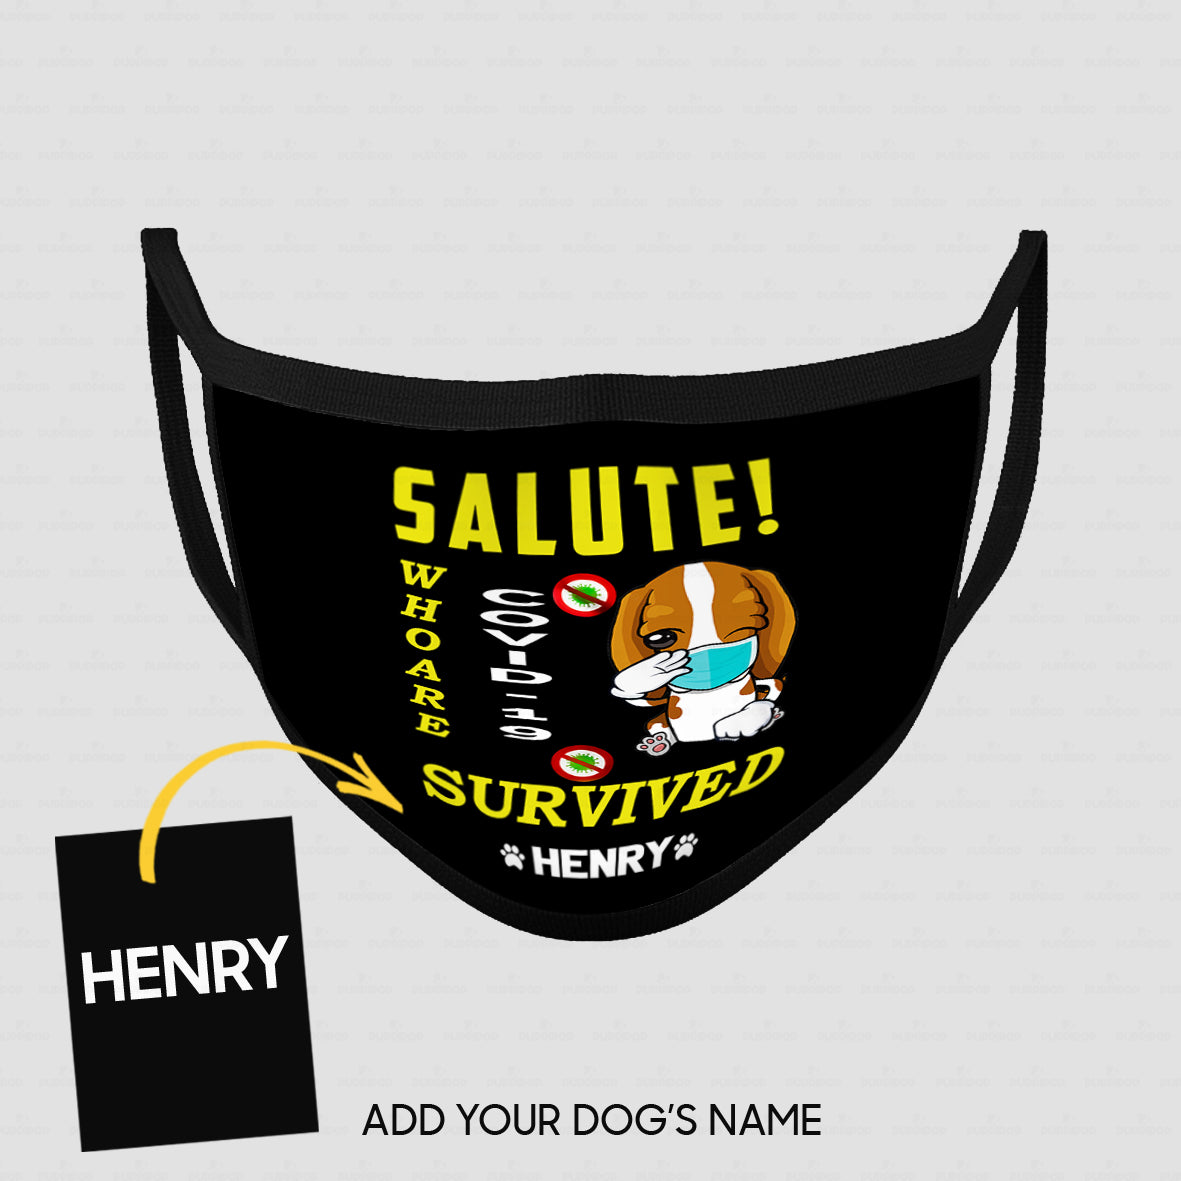 Personalized Dog Gift Idea - Salute Who Are Survived Covid 19 For Dog Lovers - Cloth Mask